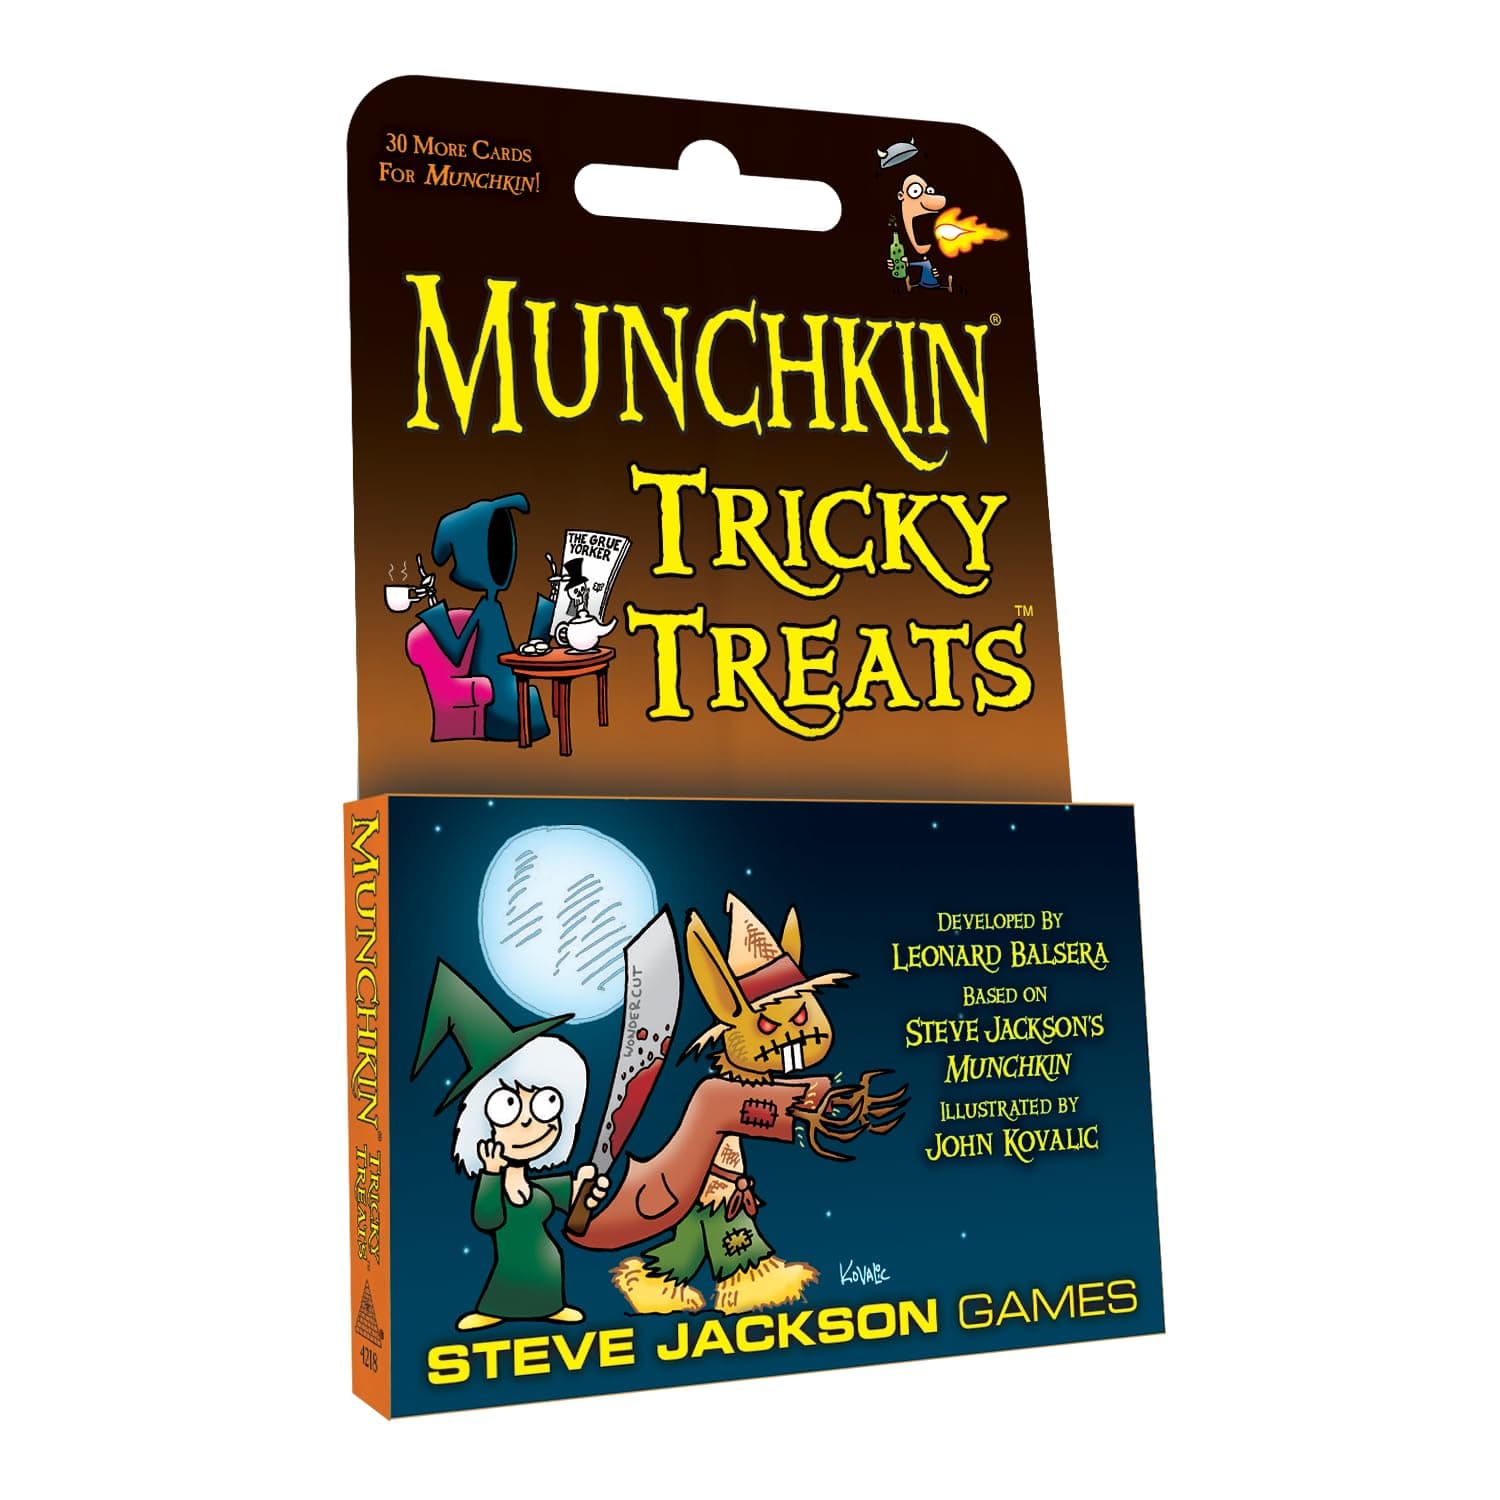 Steve Jackson Games Non-Collectible Card Steve Jackson Games Munchkin: Tricky Treats Expansion